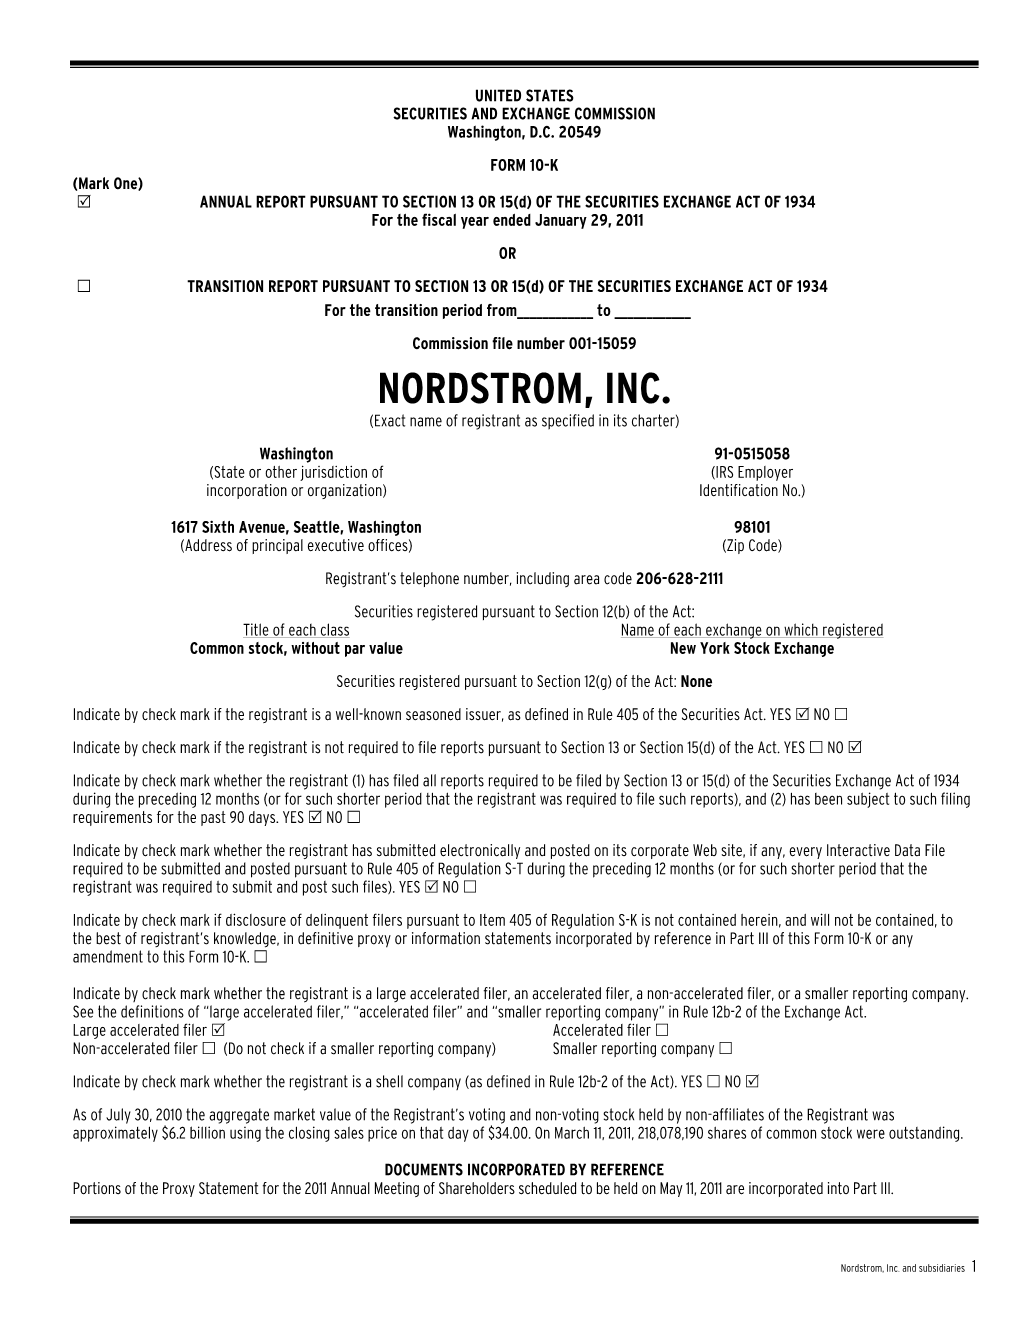 NORDSTROM, INC. (Exact Name of Registrant As Specified in Its Charter)